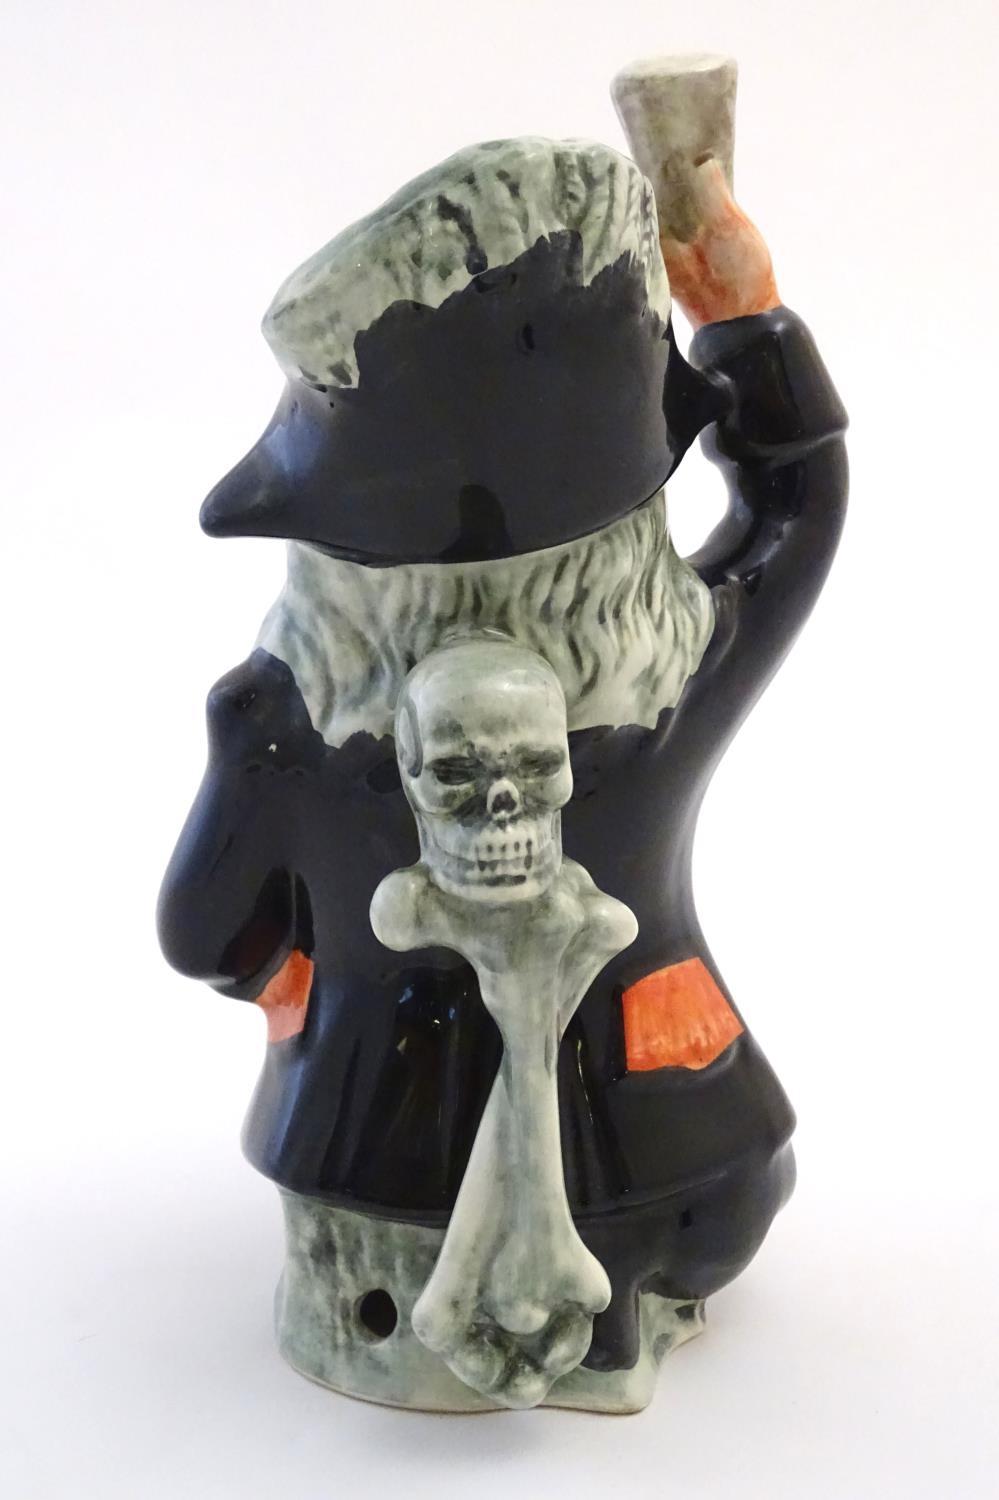 A large character figure depicting the Pirate King from the Gilbert & Sullivan comic opera The - Image 7 of 8